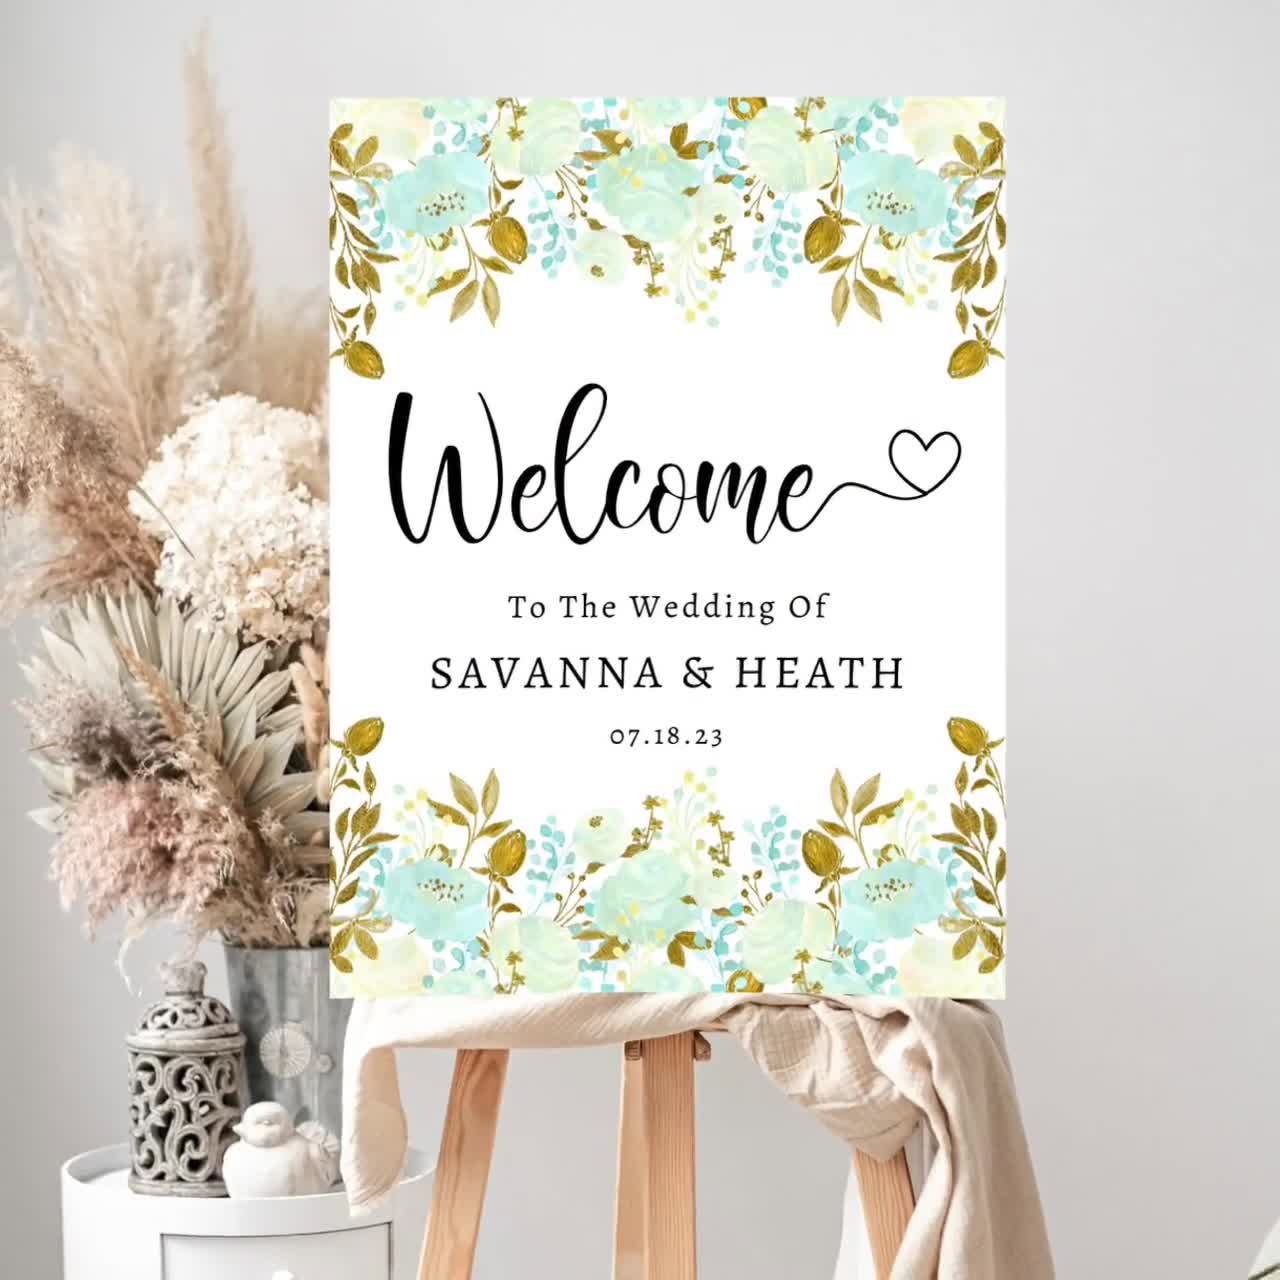 Beautiful Watercolor mint flowers frame. Mint gold wedding invites